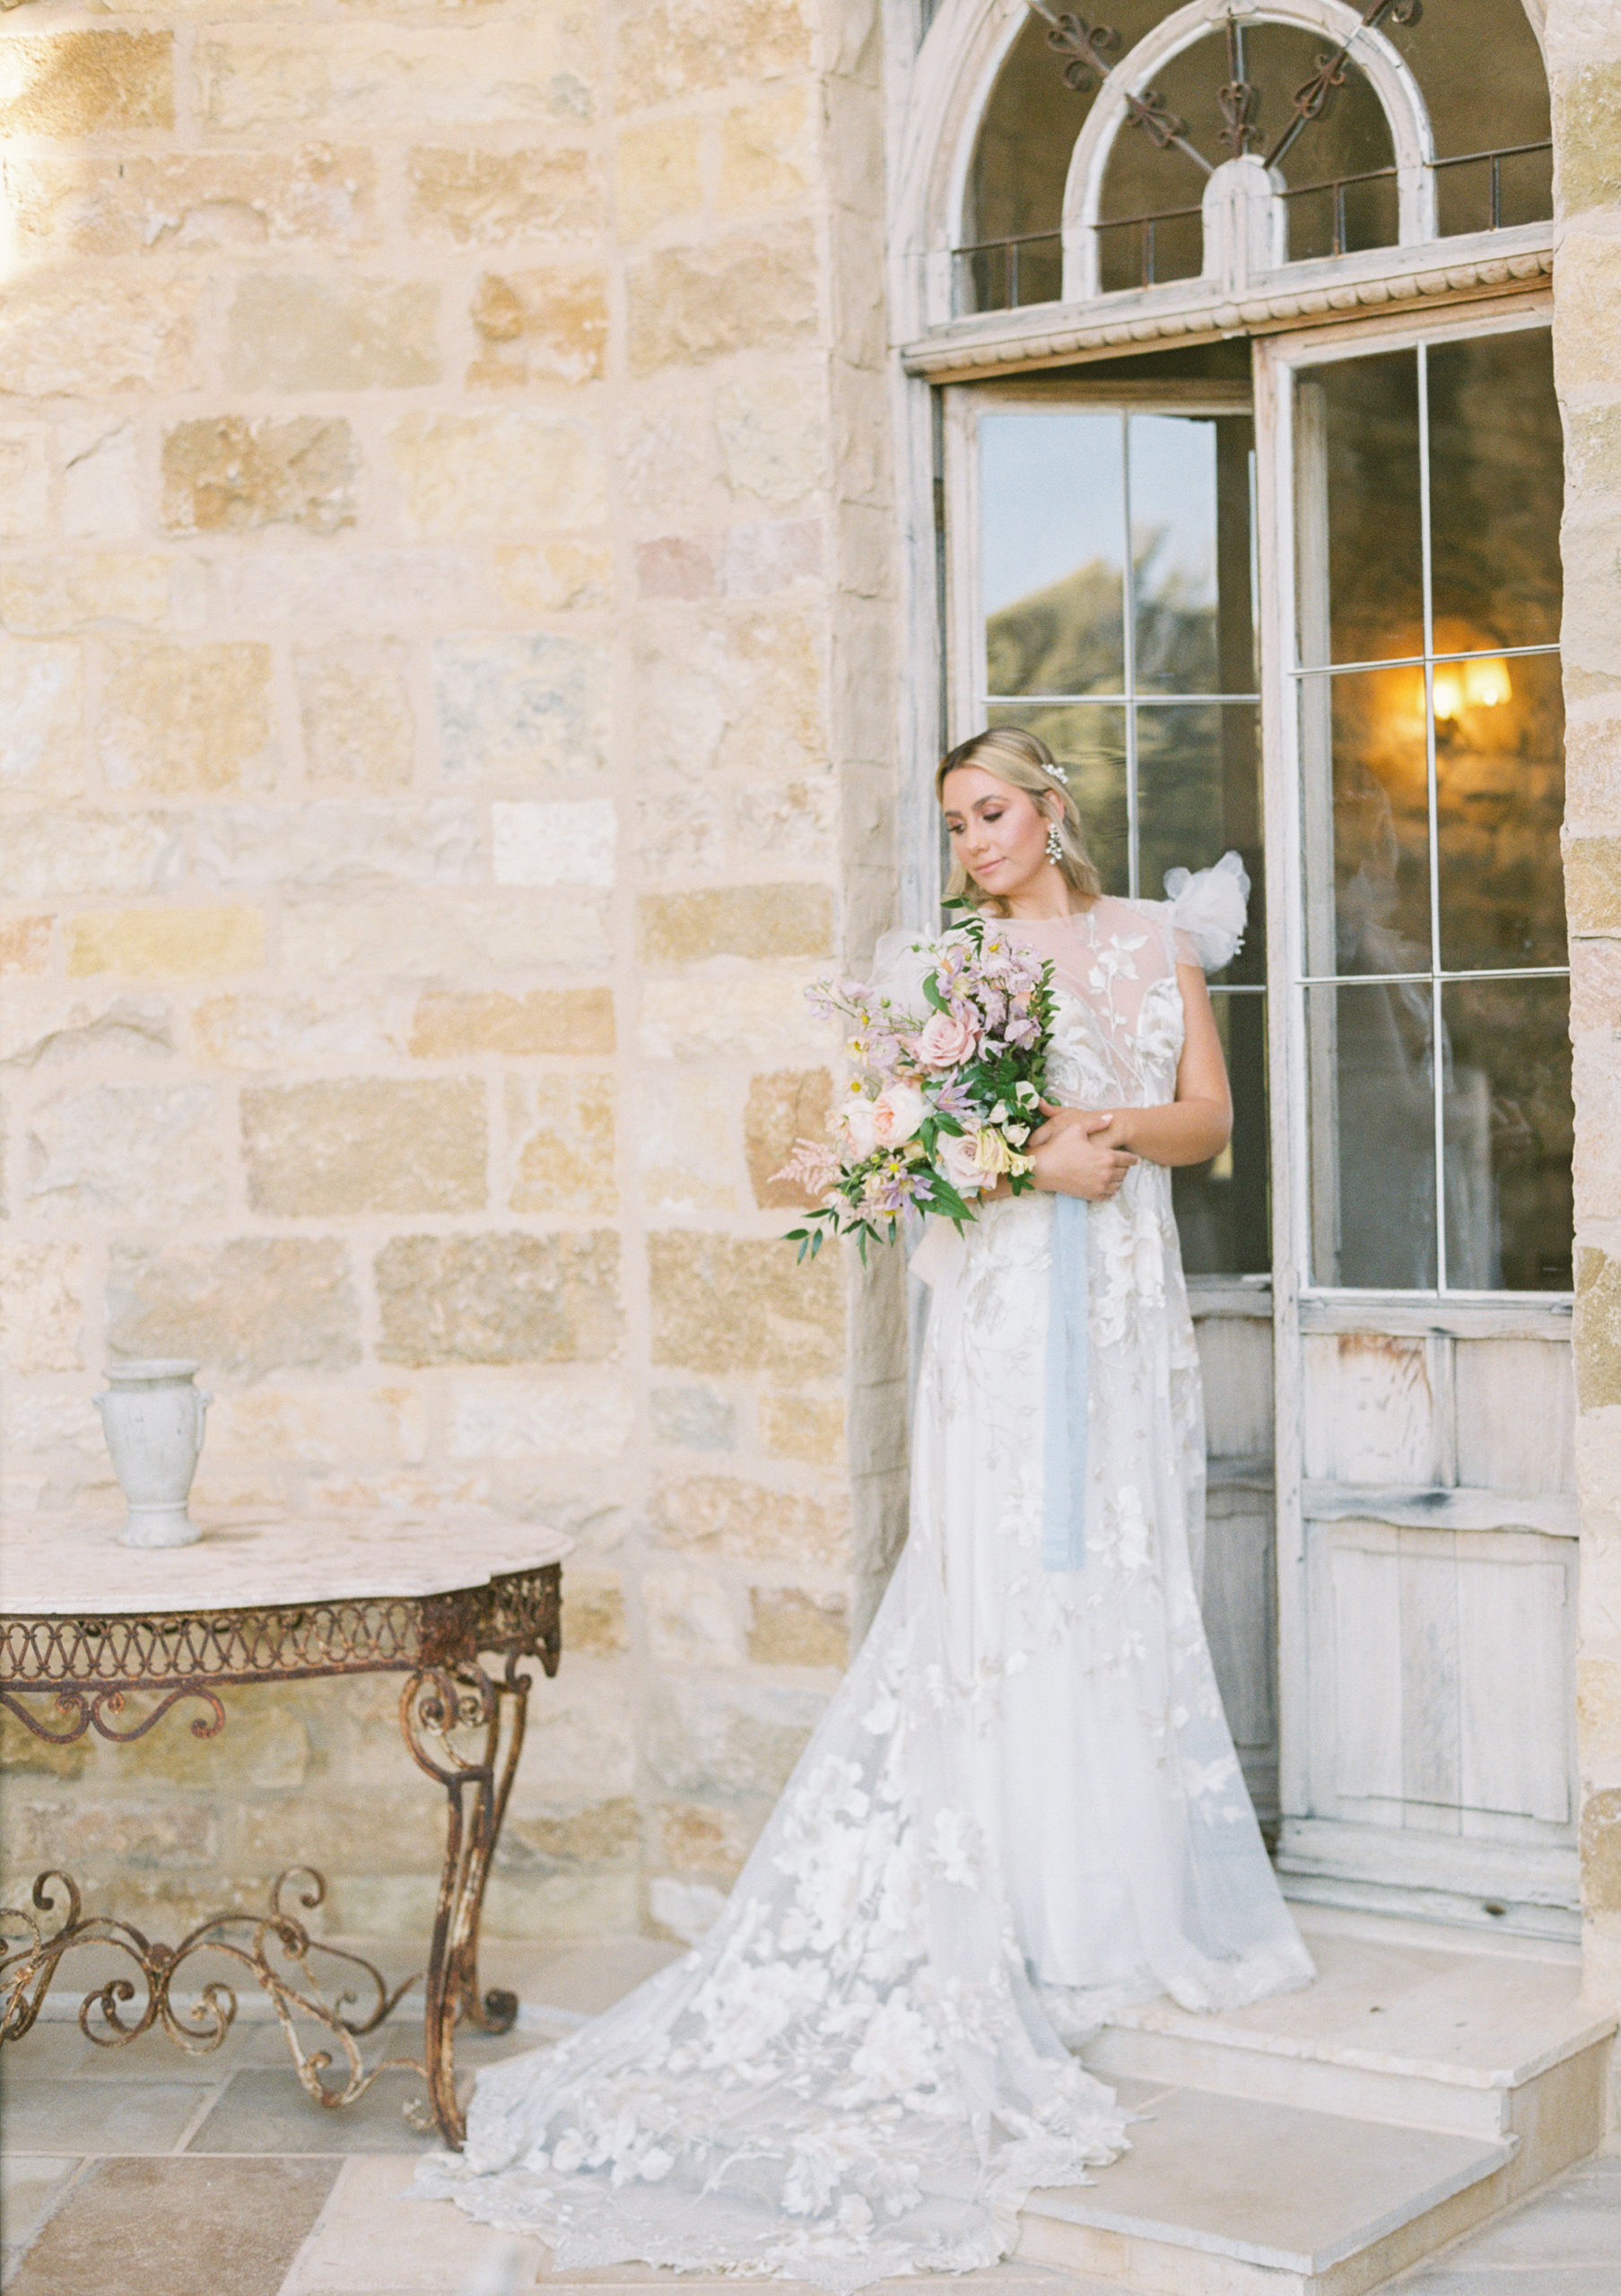 Spring wedding inspiration in Claire Pettibone gown